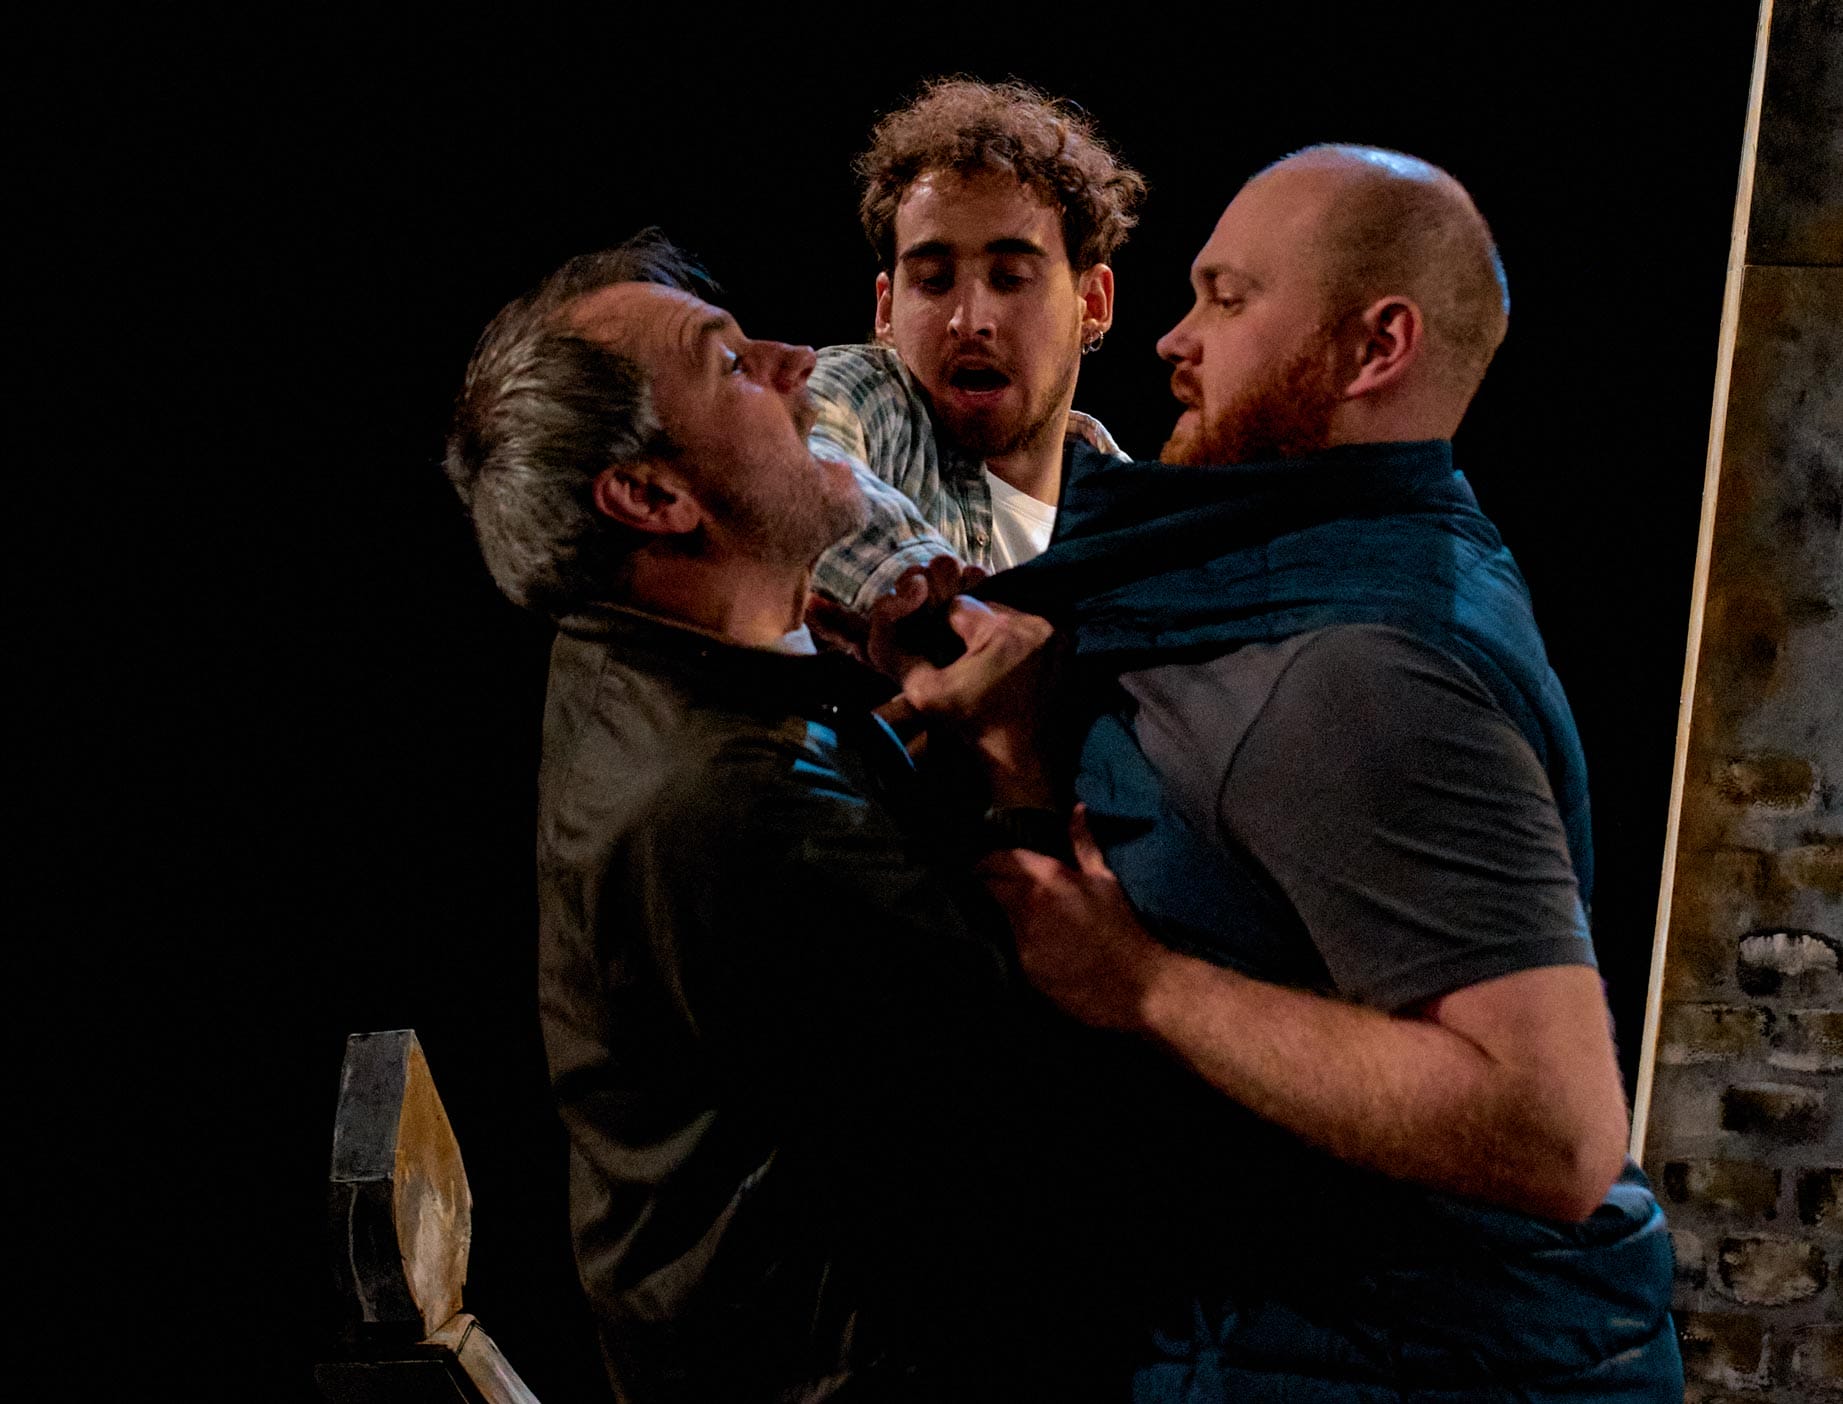 Performers on stage in The Freshwater Five - two men fight as a third tries to separate them.